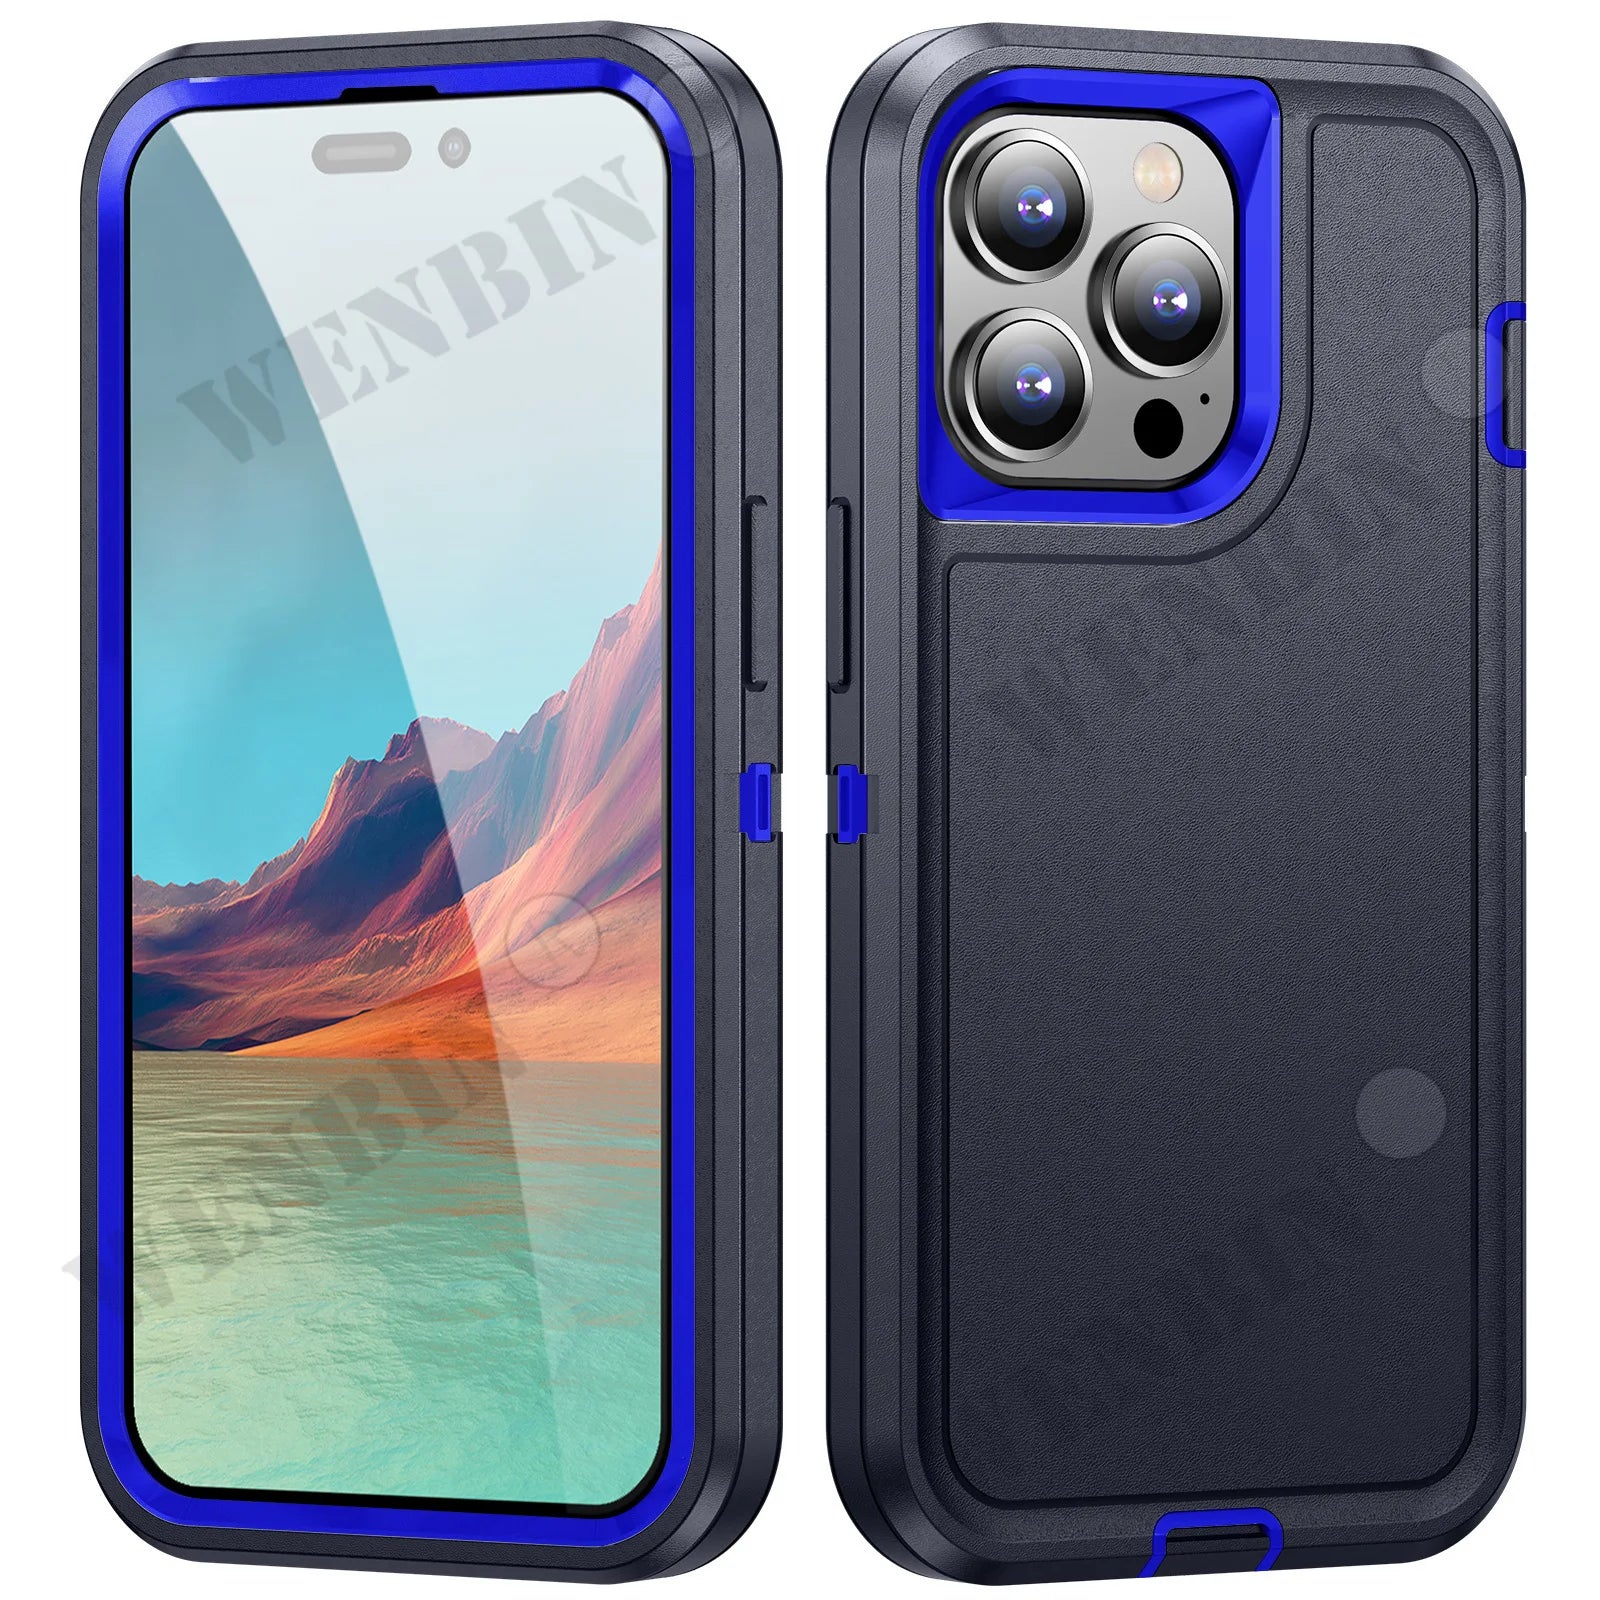 Heavy Duty Shockproof Anti-Scratch Rugged Protective iPhone Case - DealJustDeal